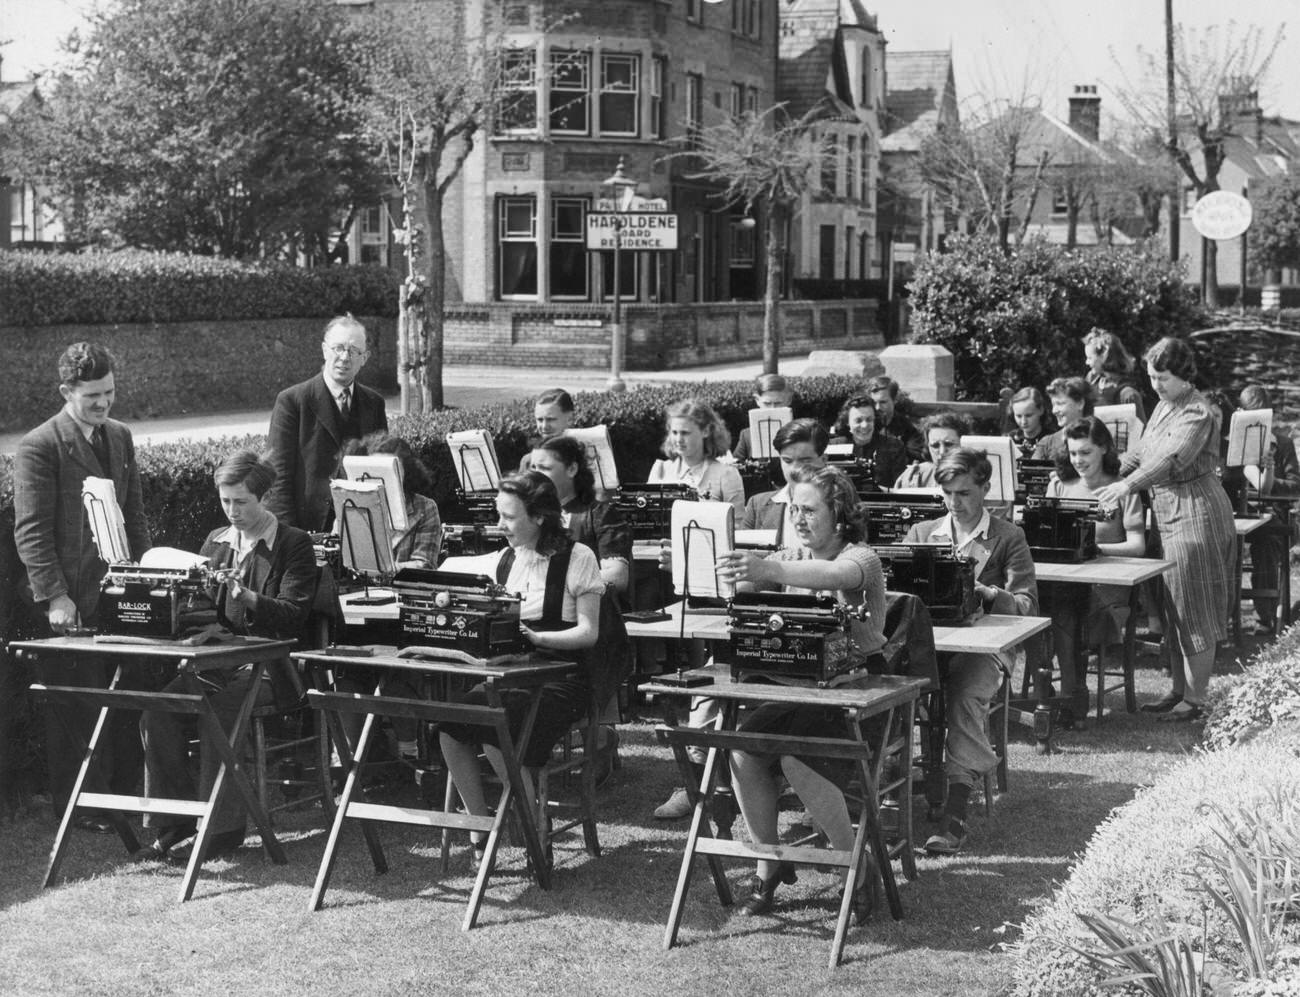 Outdoor Typing Lesson at East London Day Continuation School, Clacton, 1940